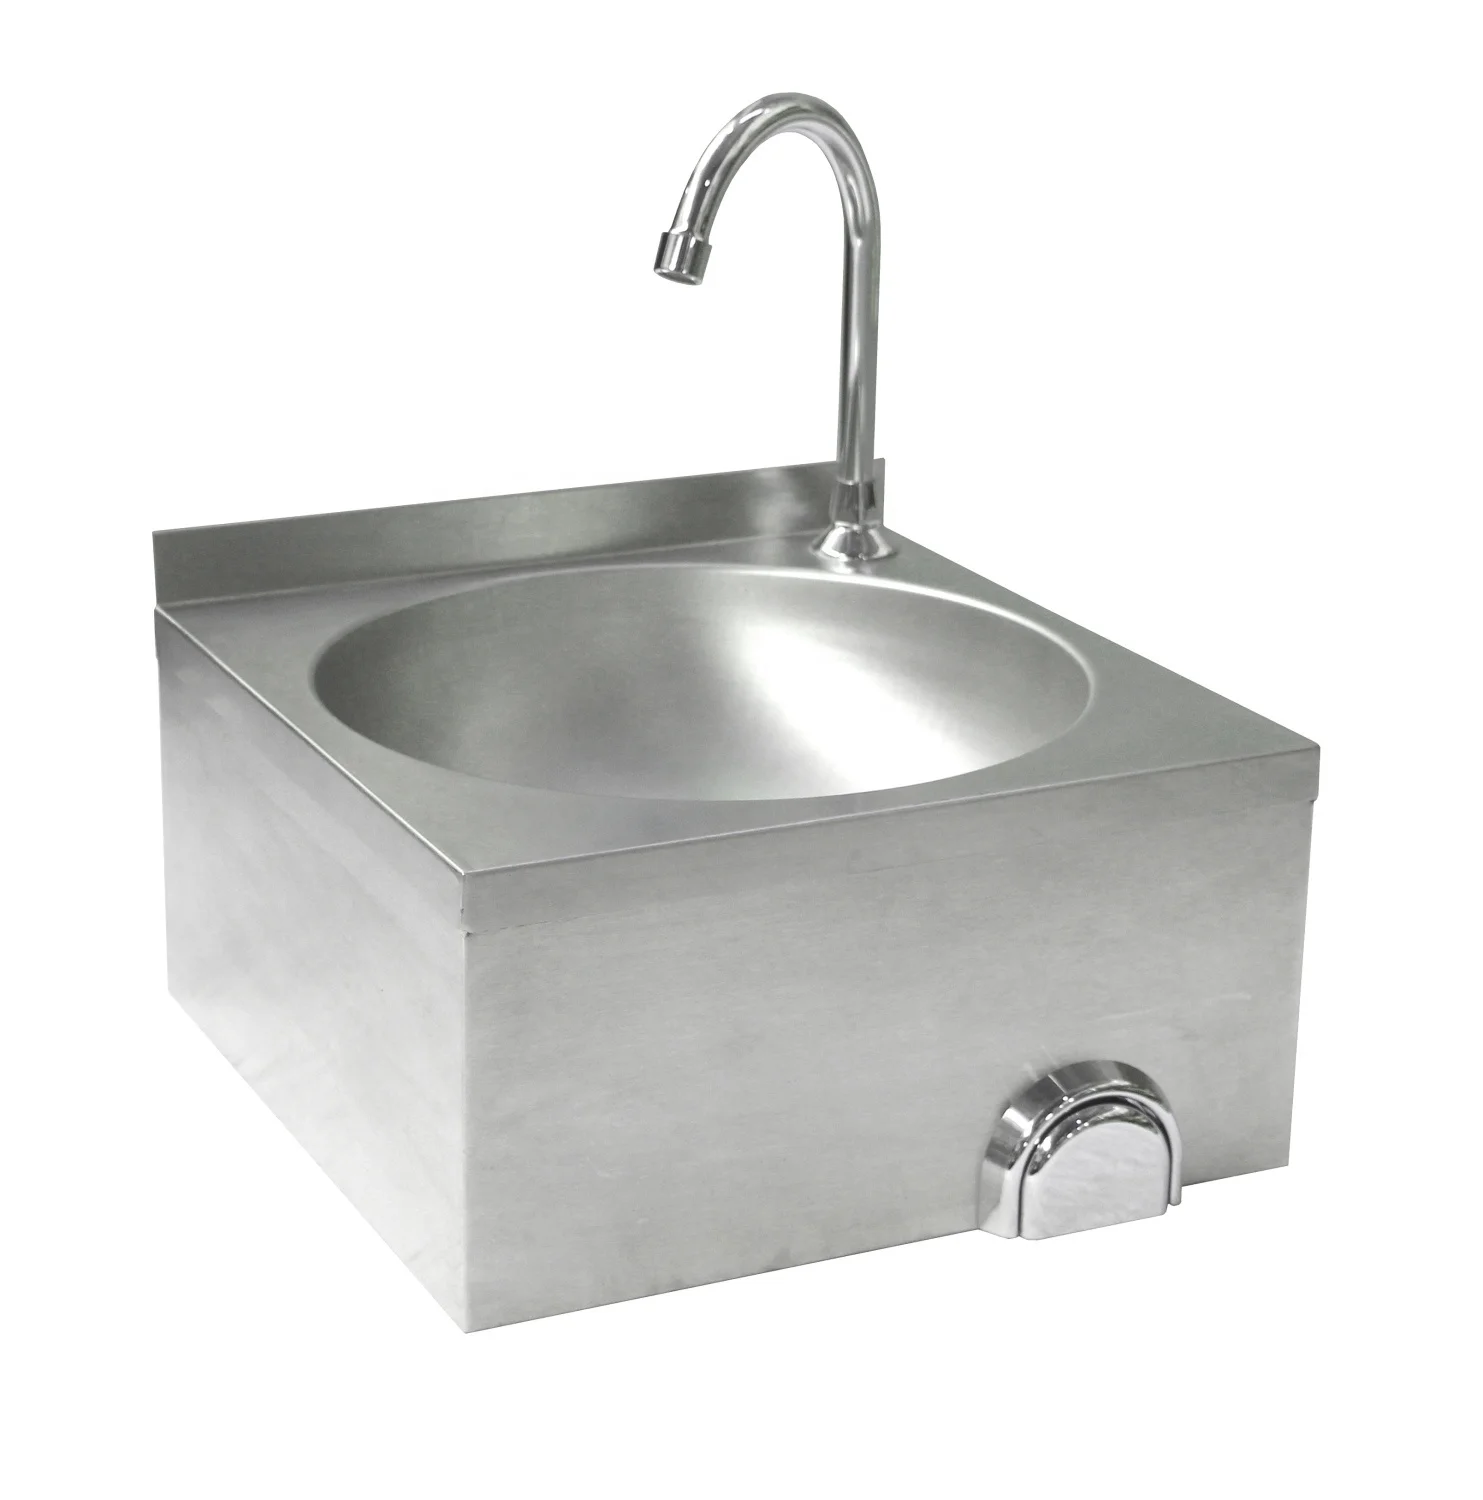 
NSF listed stainless steel 304 round square knee operated kitchen sink wash basin 